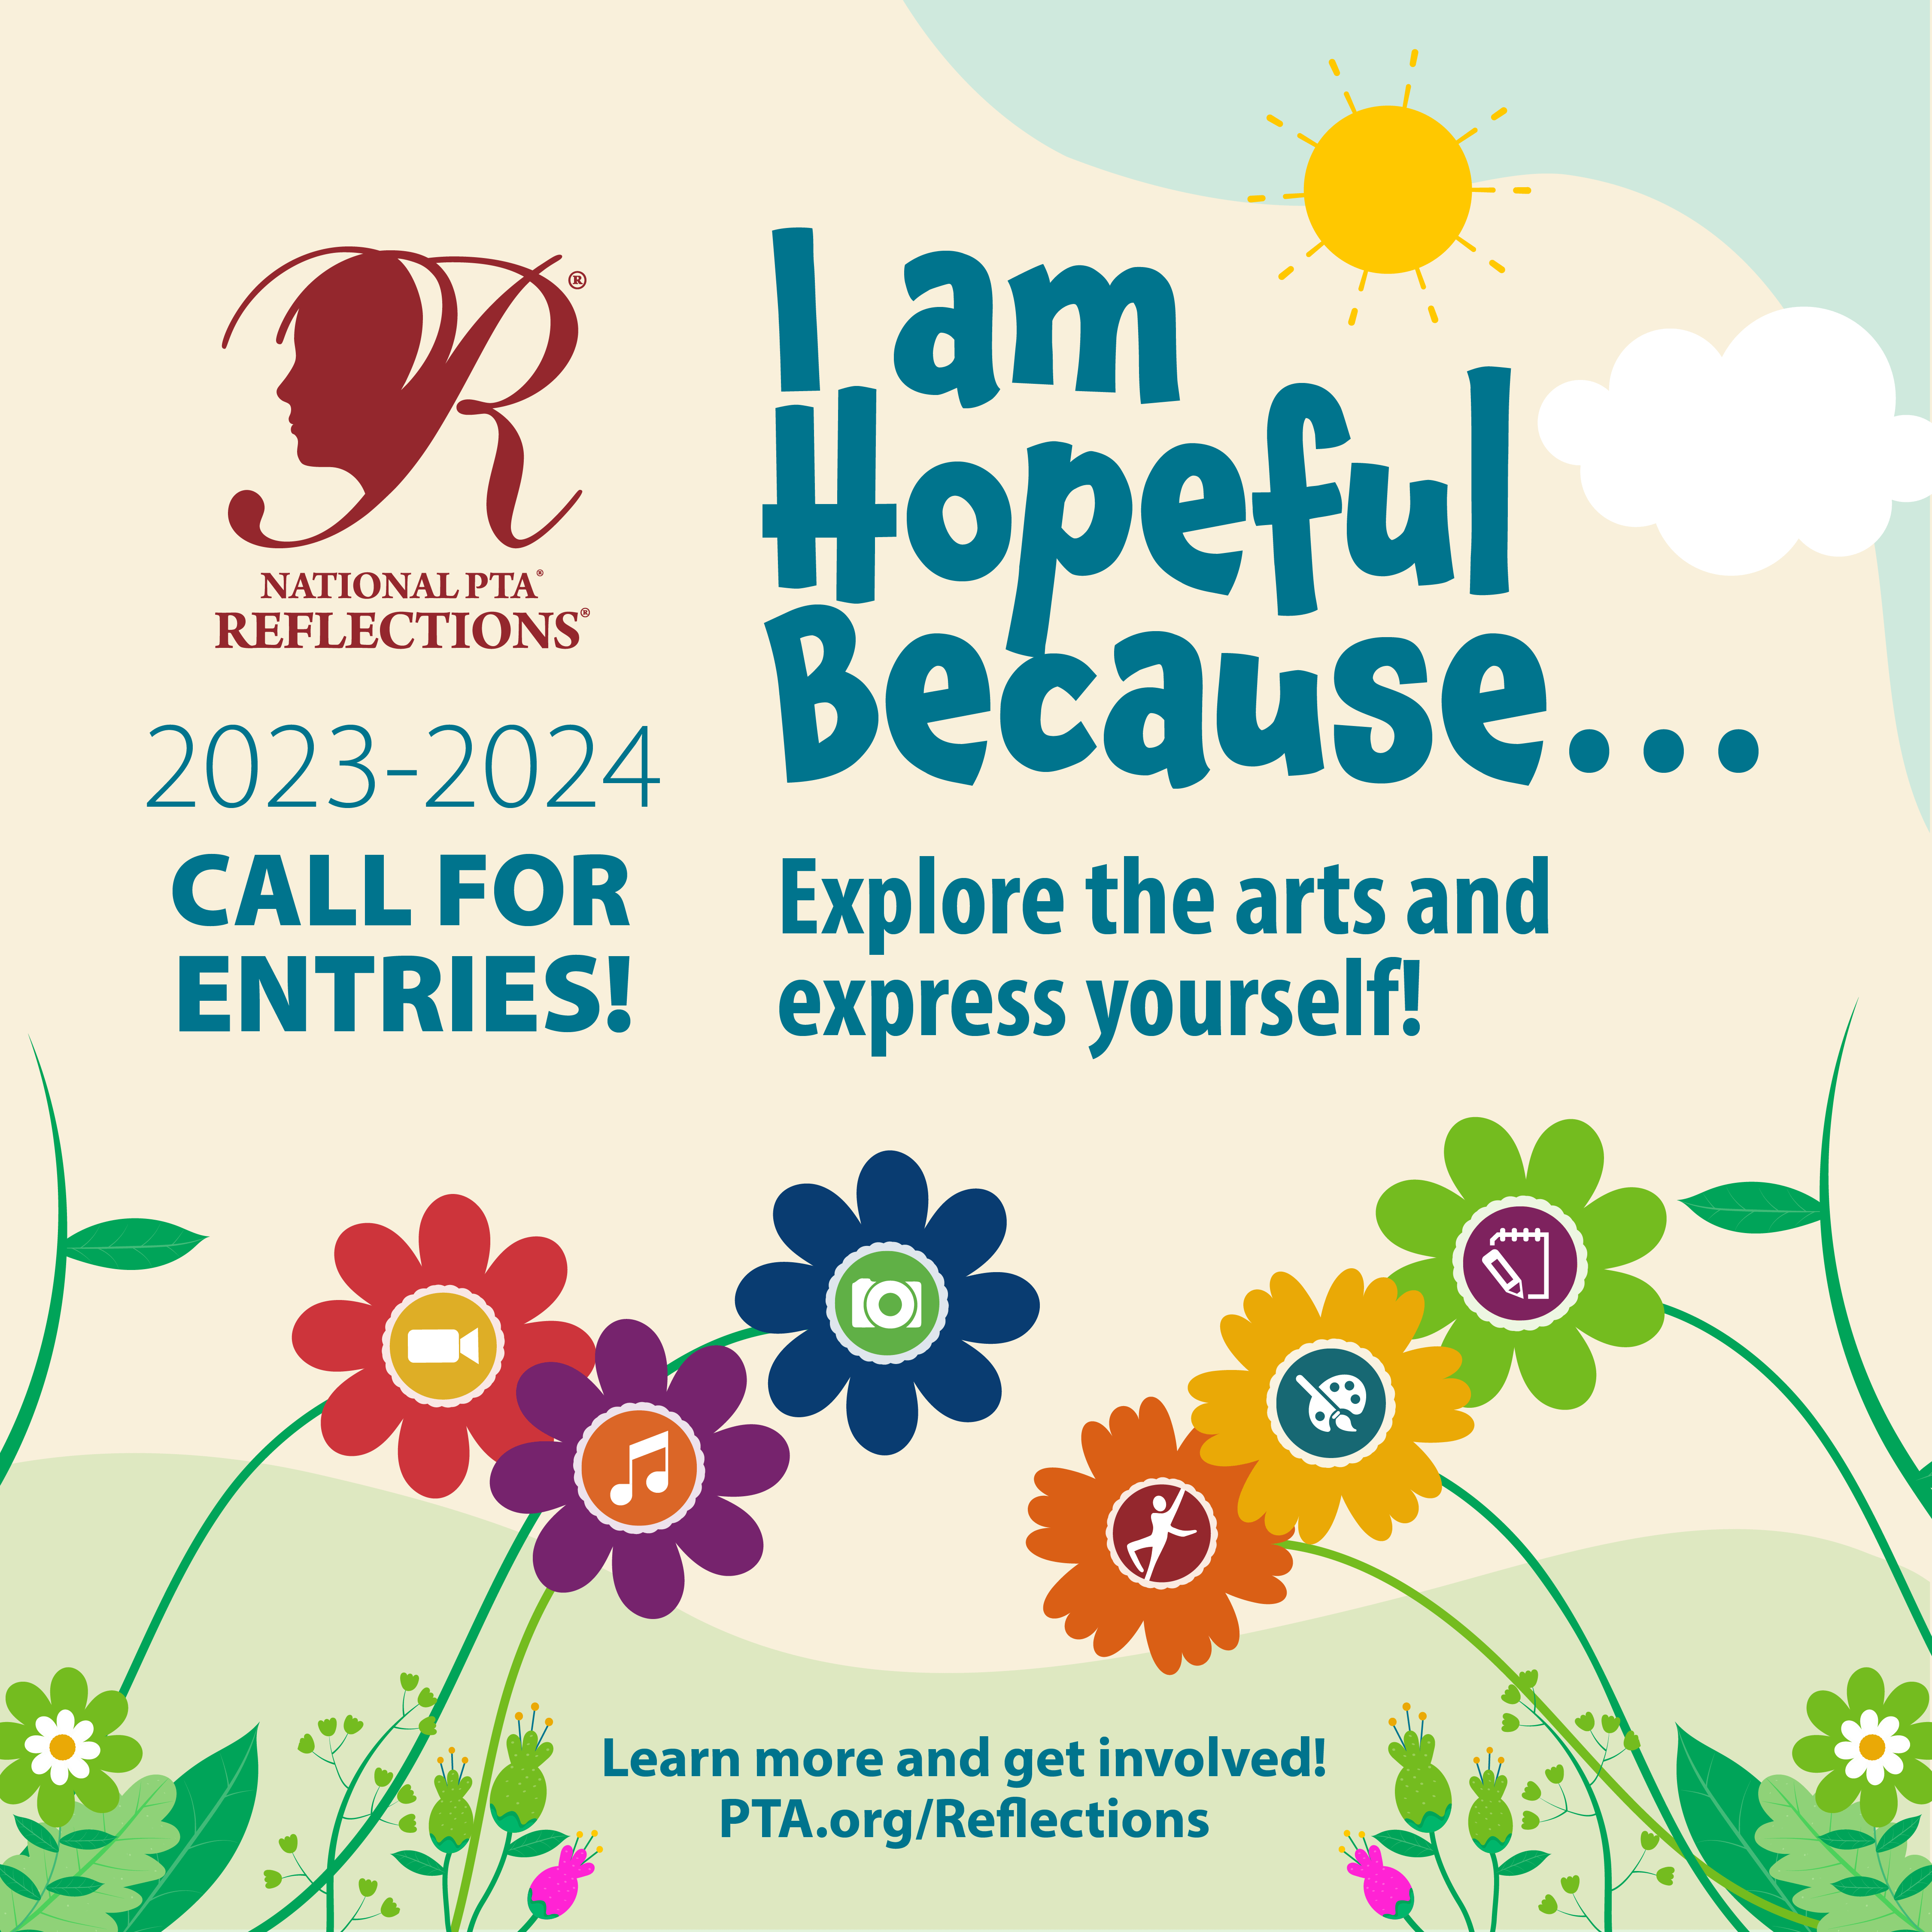 National PTA Reflections 2023-2024 Call for Entries. "I am Hopeful Because..." Explore the arts and express yourself.